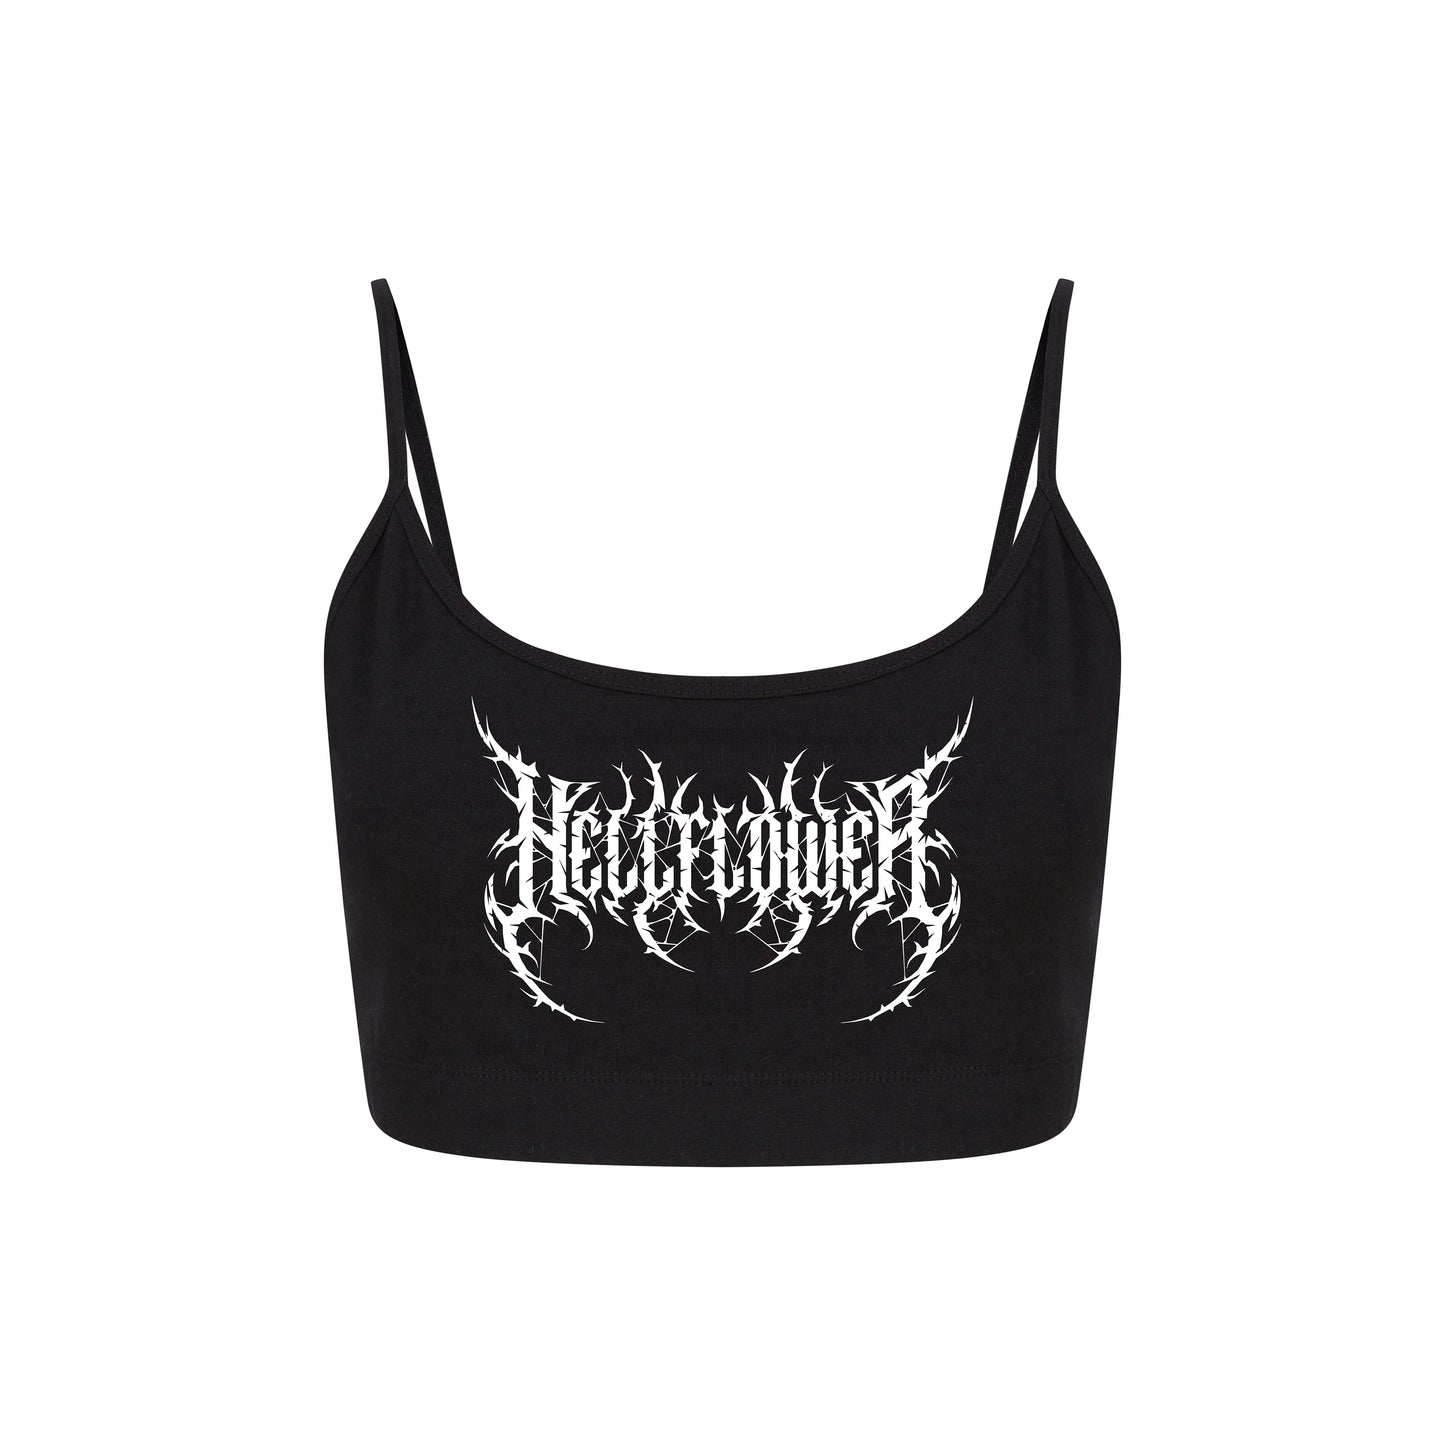 Guttural cropped cami